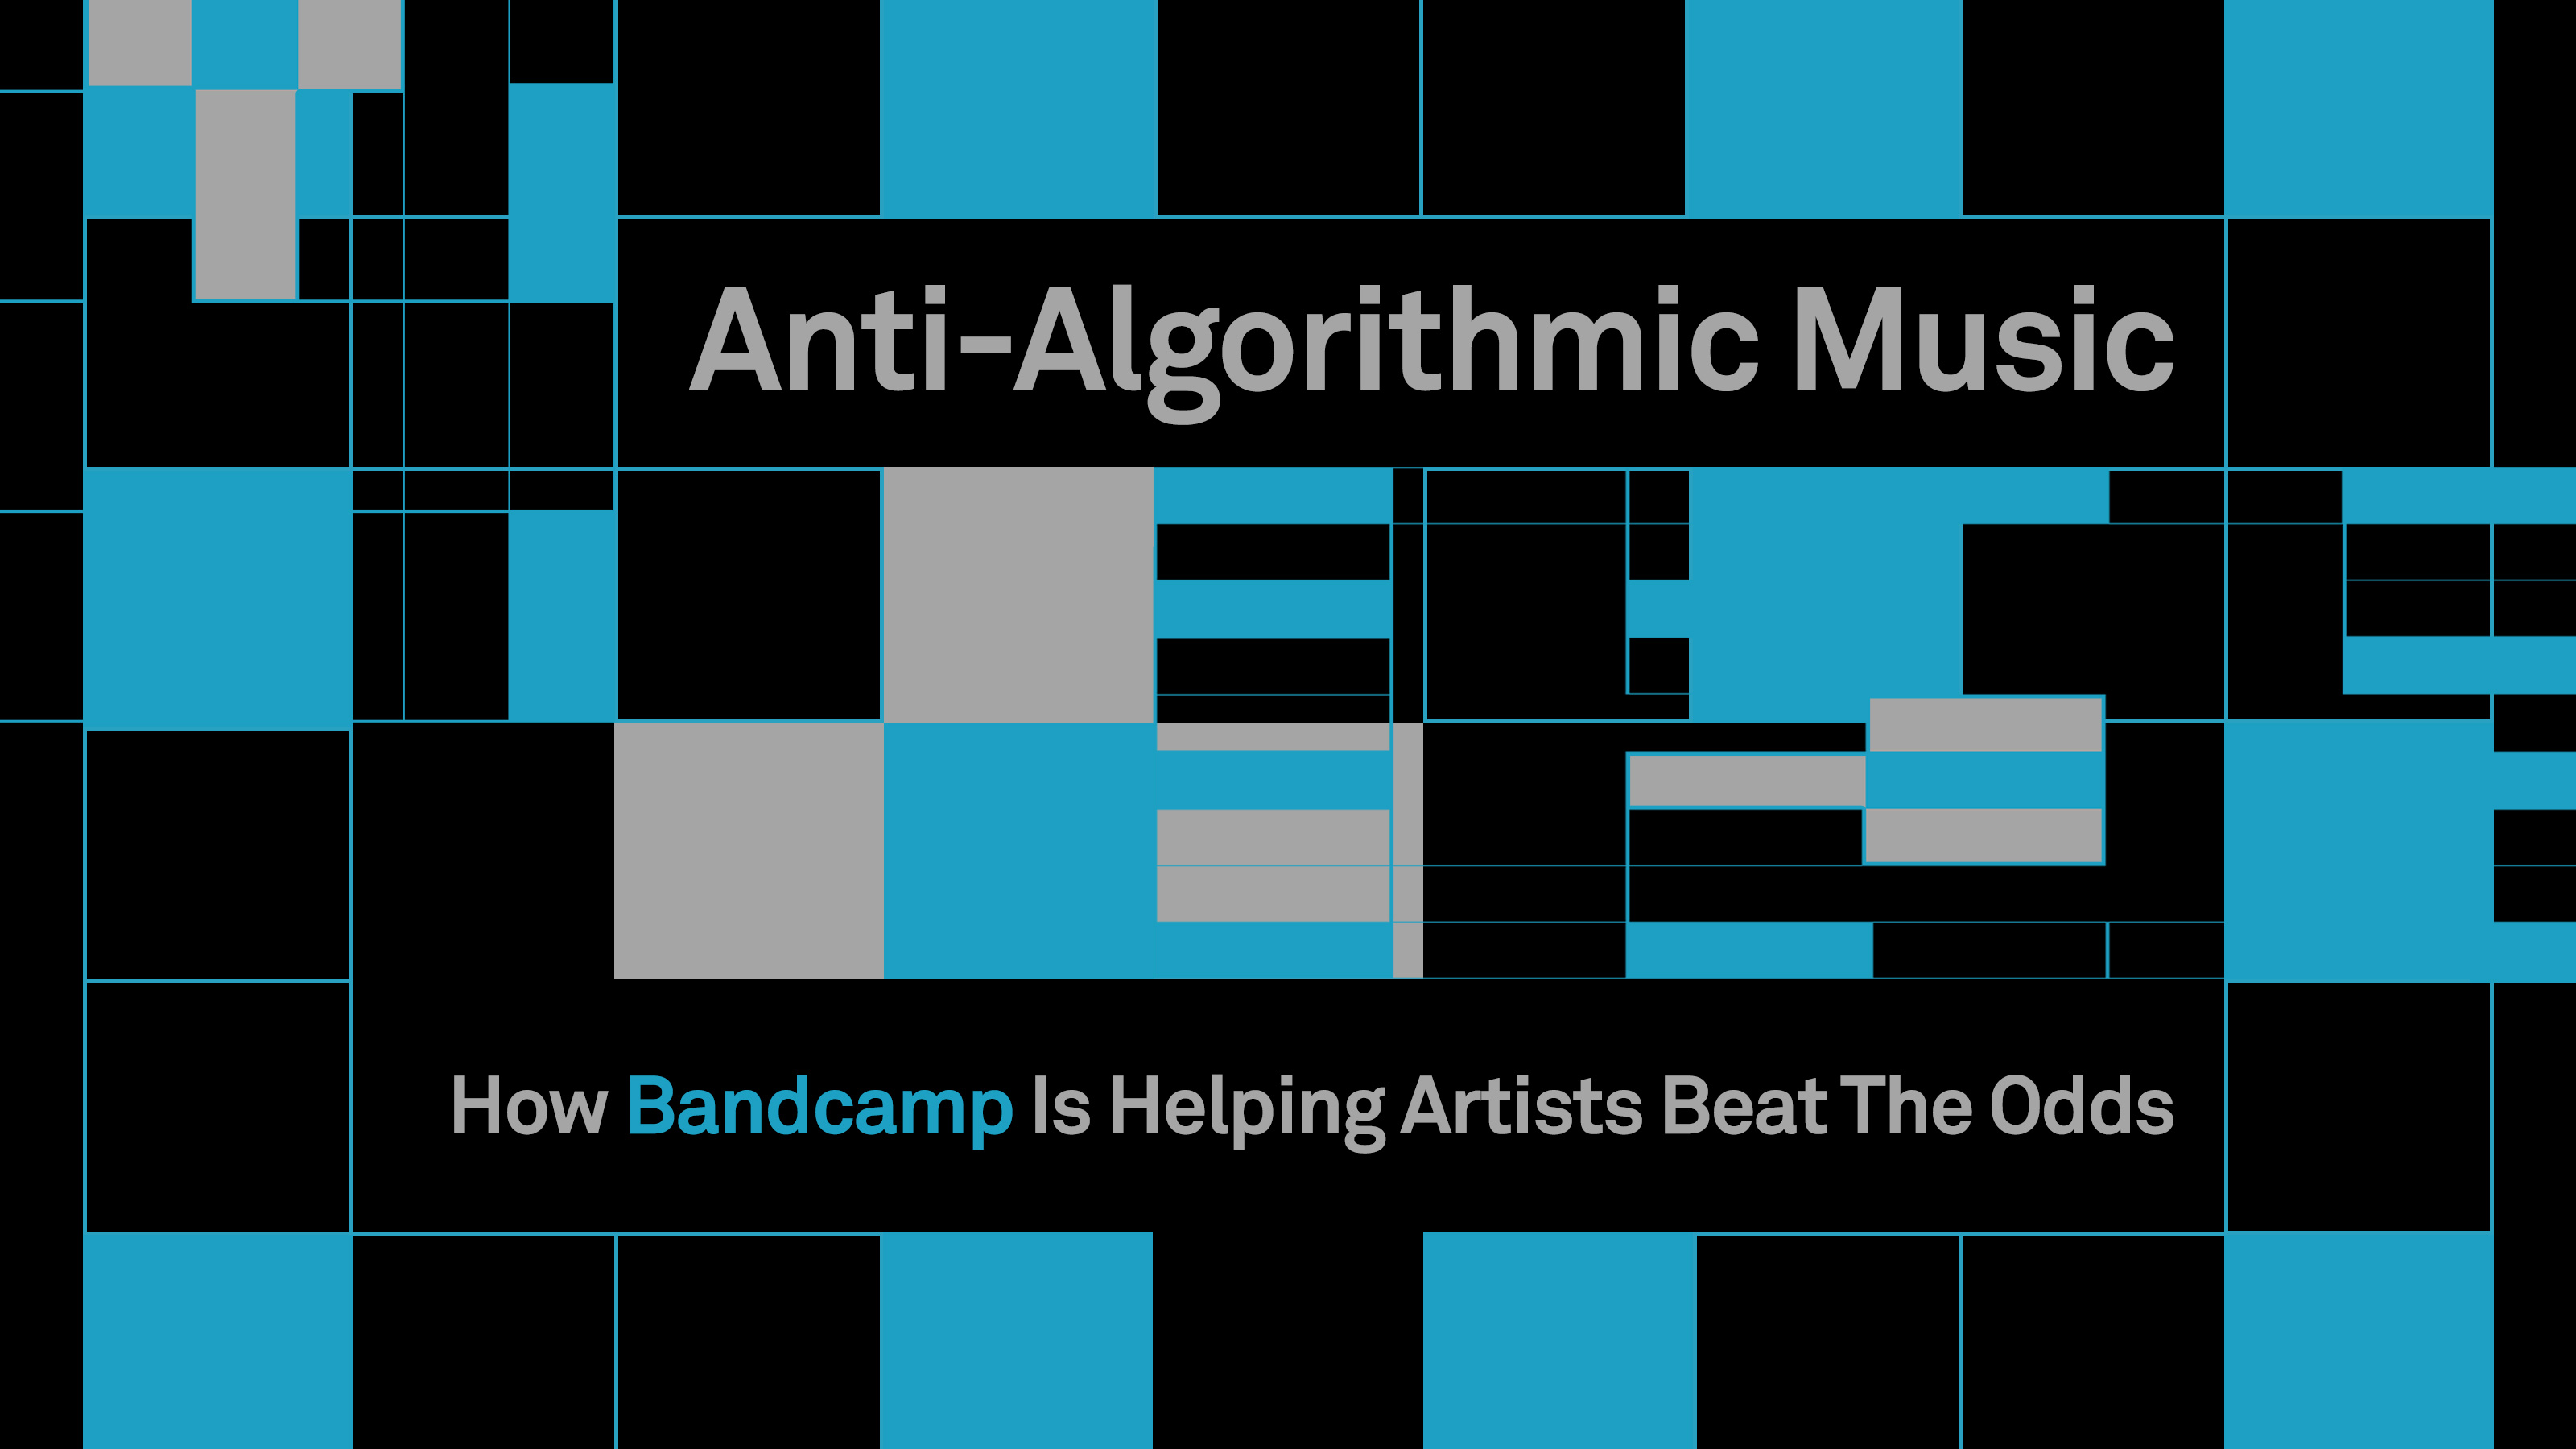 Anti-Algorithmic Music: How Bandcamp Is Helping Artists Beat The Odds